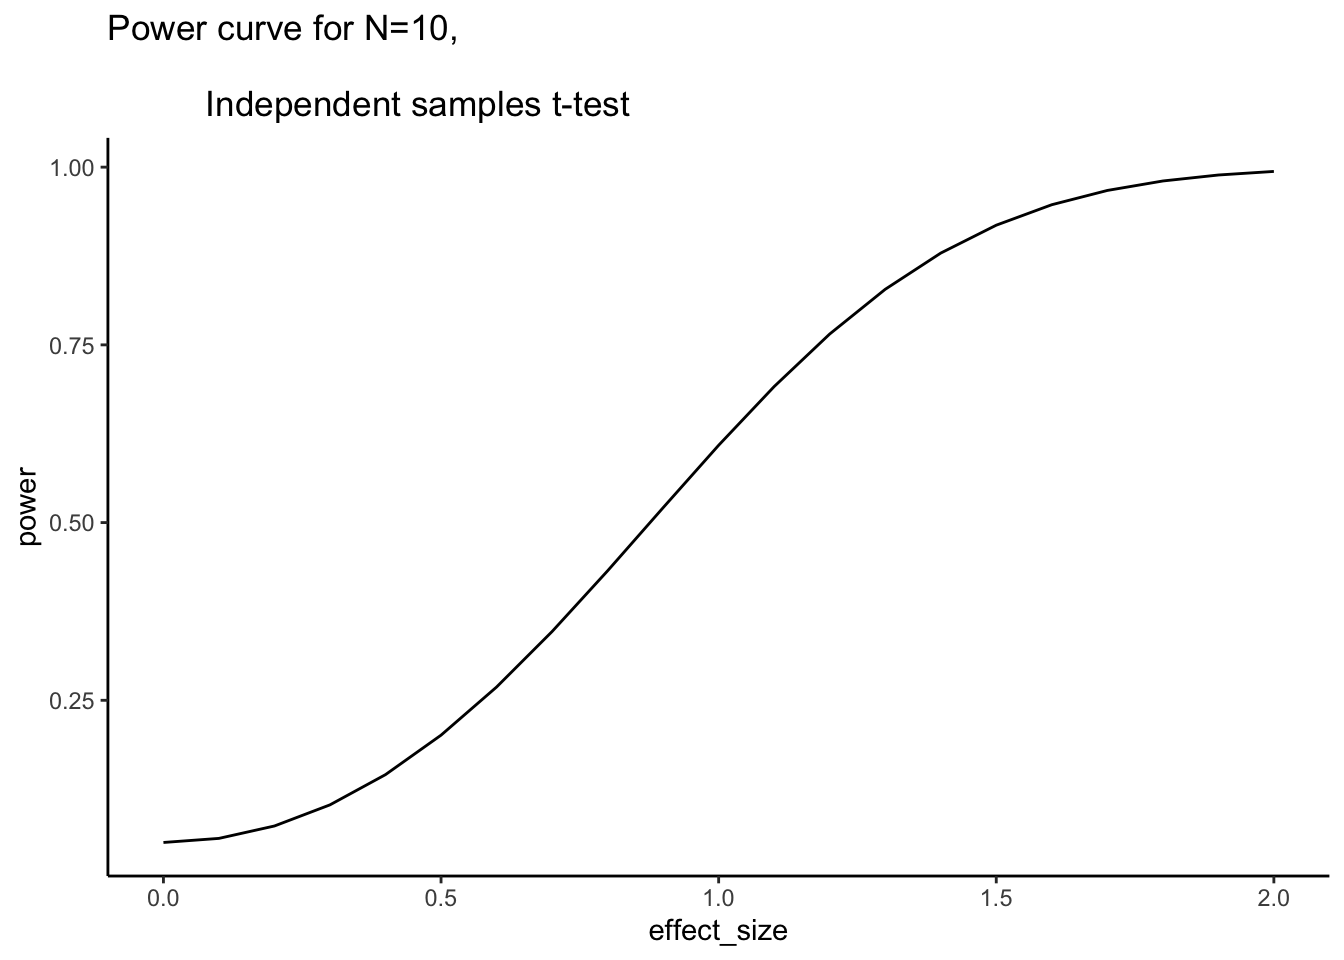 This figure shows power as a function of effect-size (Cohen's d) for a between-subjects independent samples t-test, with N=10, and alpha criterion 0.05.